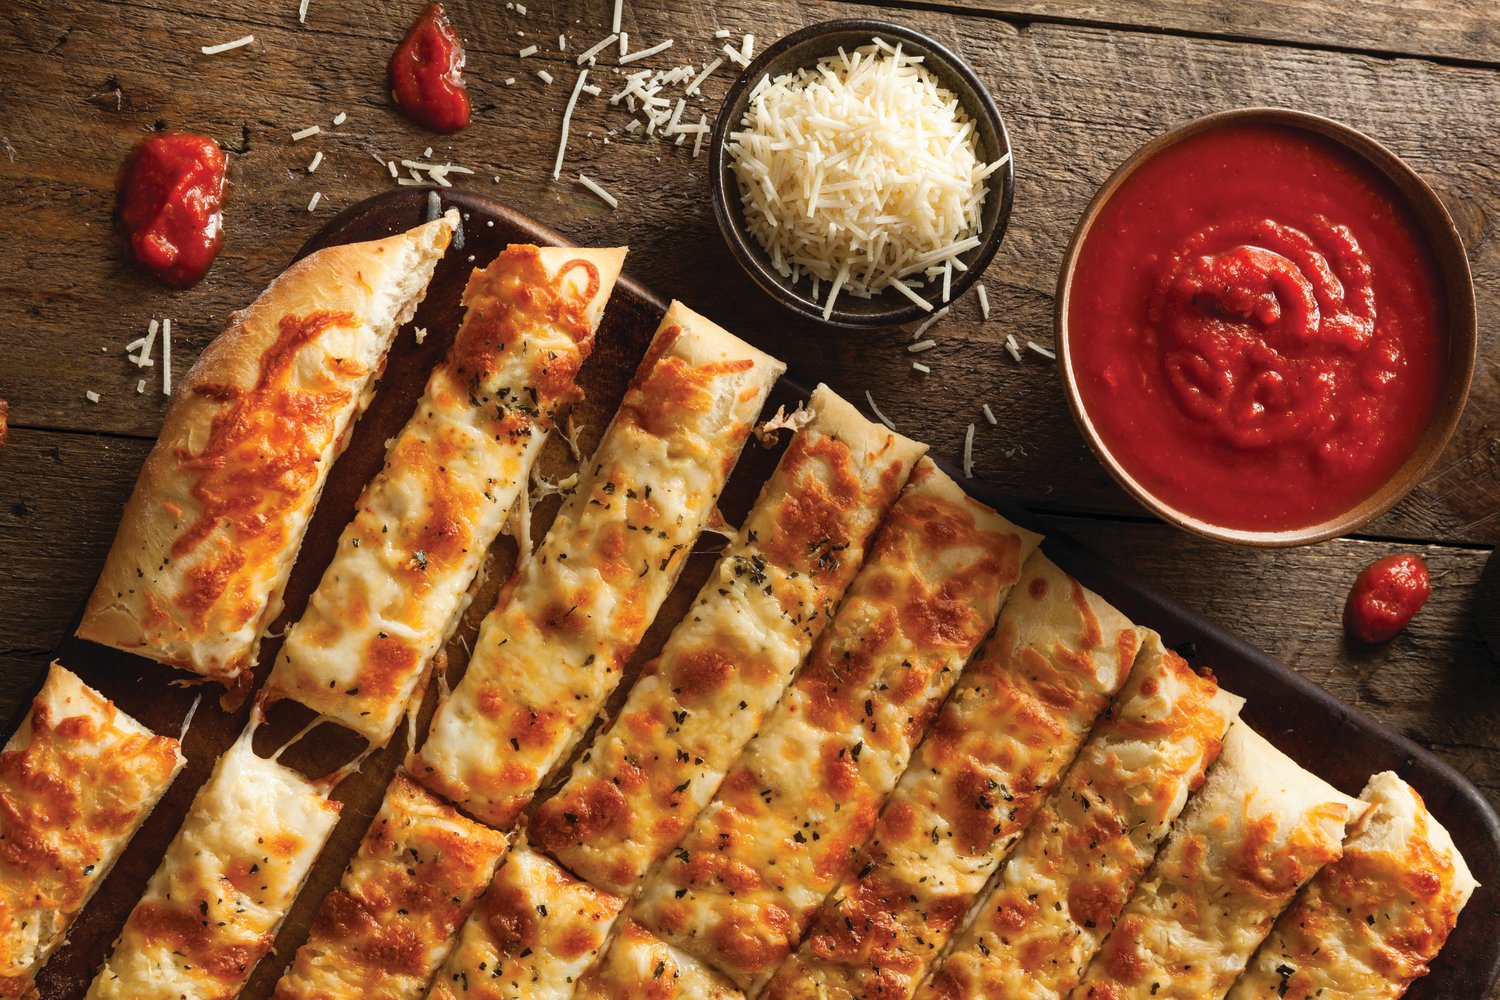 Here’s something simple but scrumptious: cheese sticks made from frozen pizza dough.